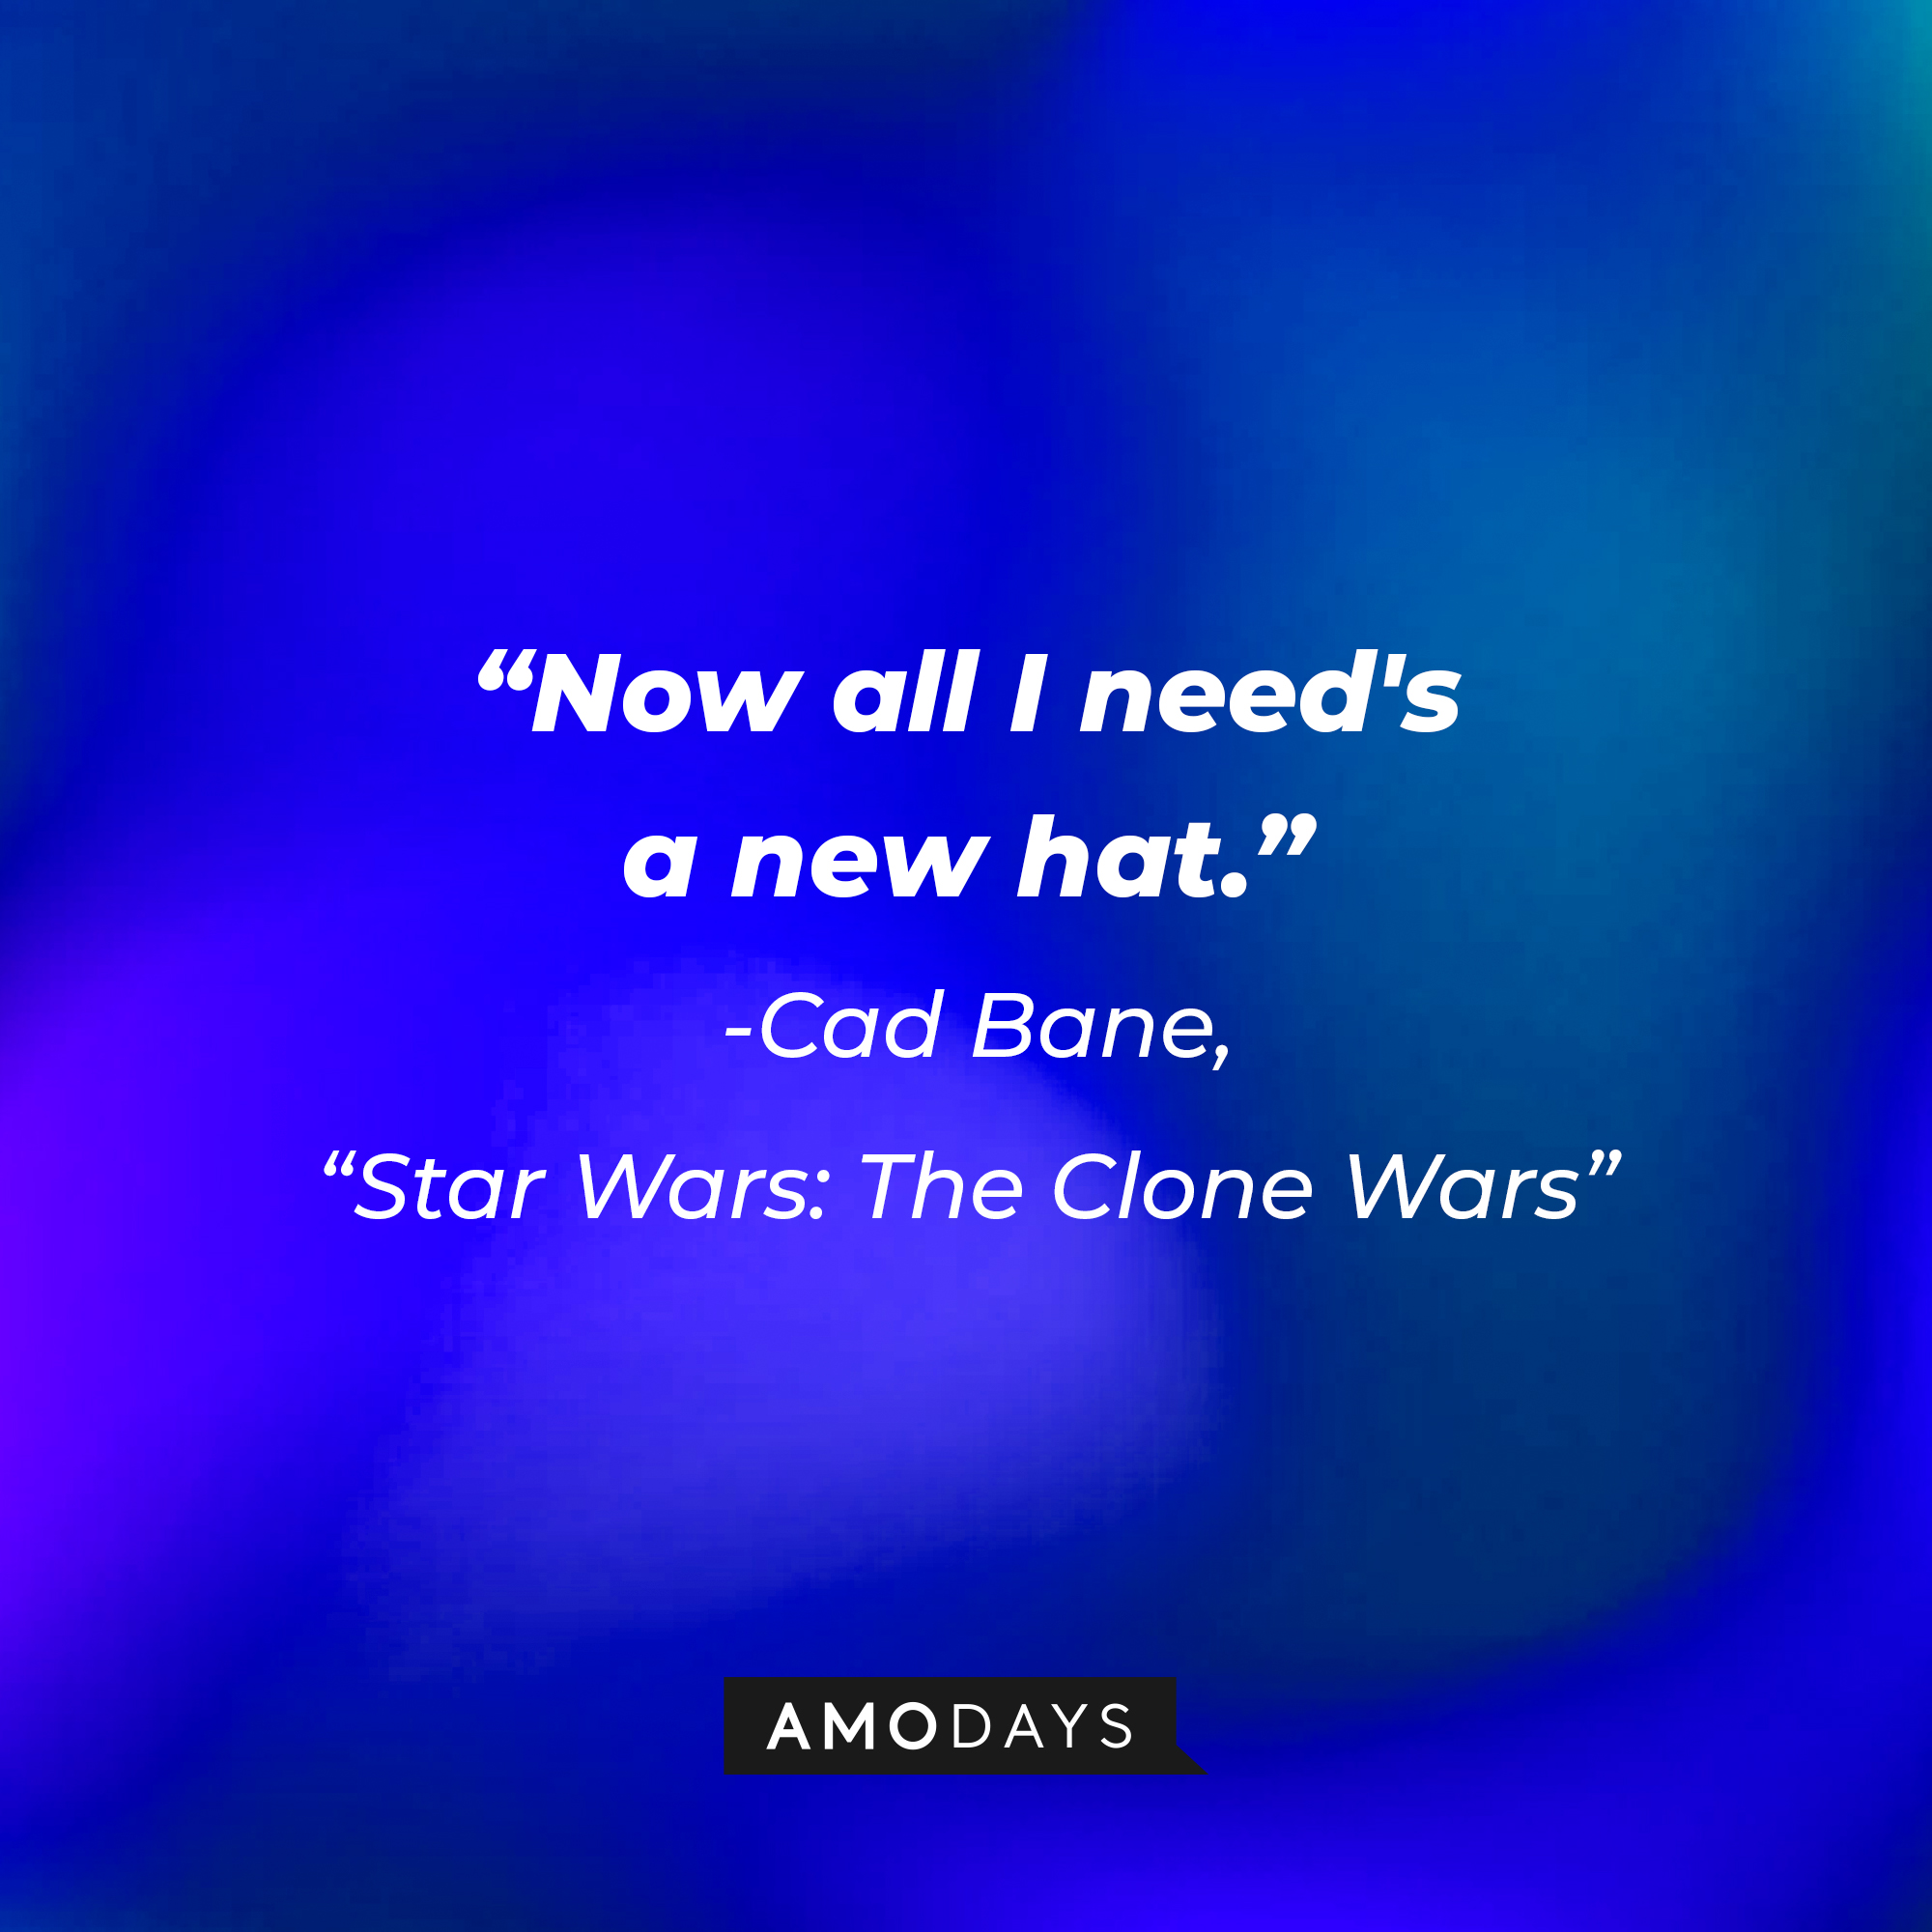 Cad Bane’s quote:  "Now all I need's a new hat." | Image: AmoDays Wars"